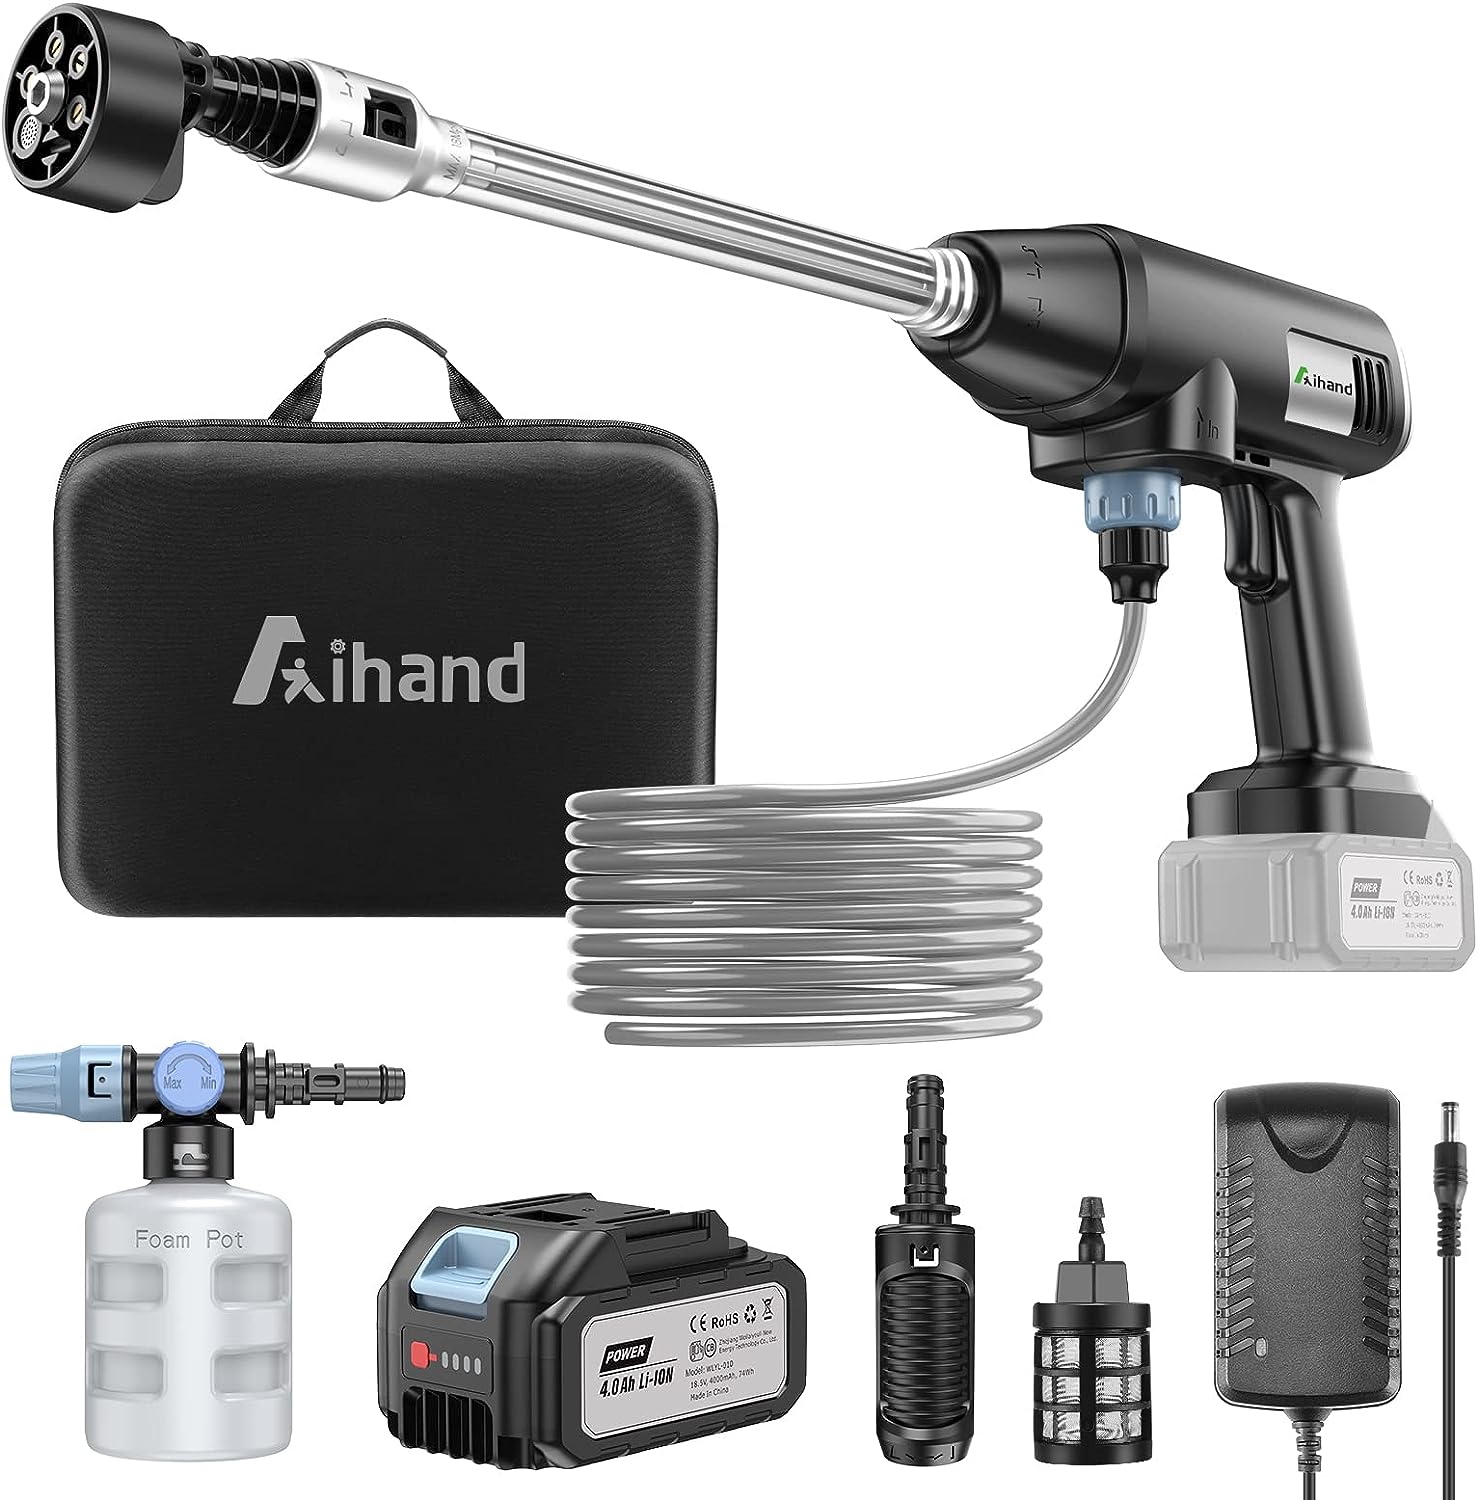 Aihand Cordless Pressure Washer, 652PSI Portable Power [...]